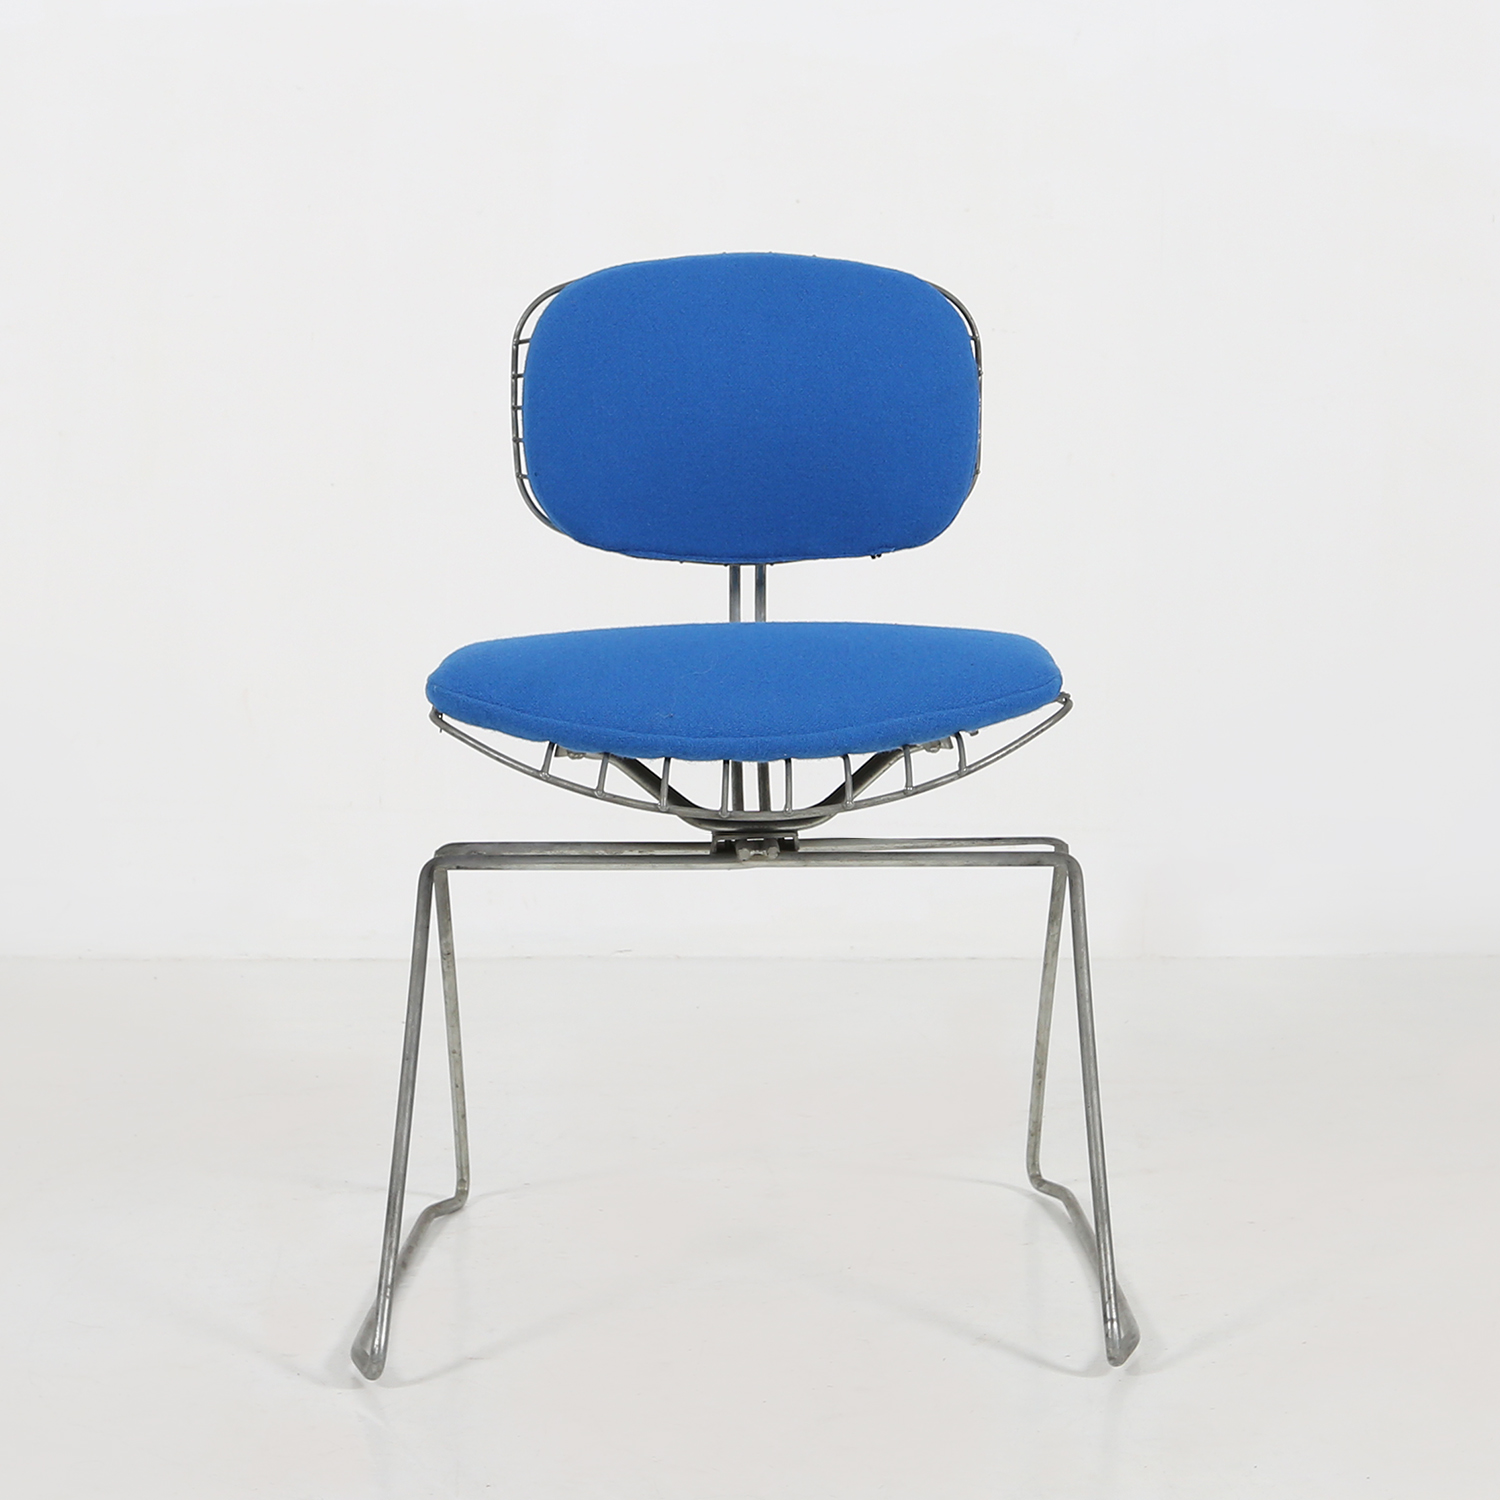 Beaubourg Chair by Michel Cadestin for the Pompidou Centre